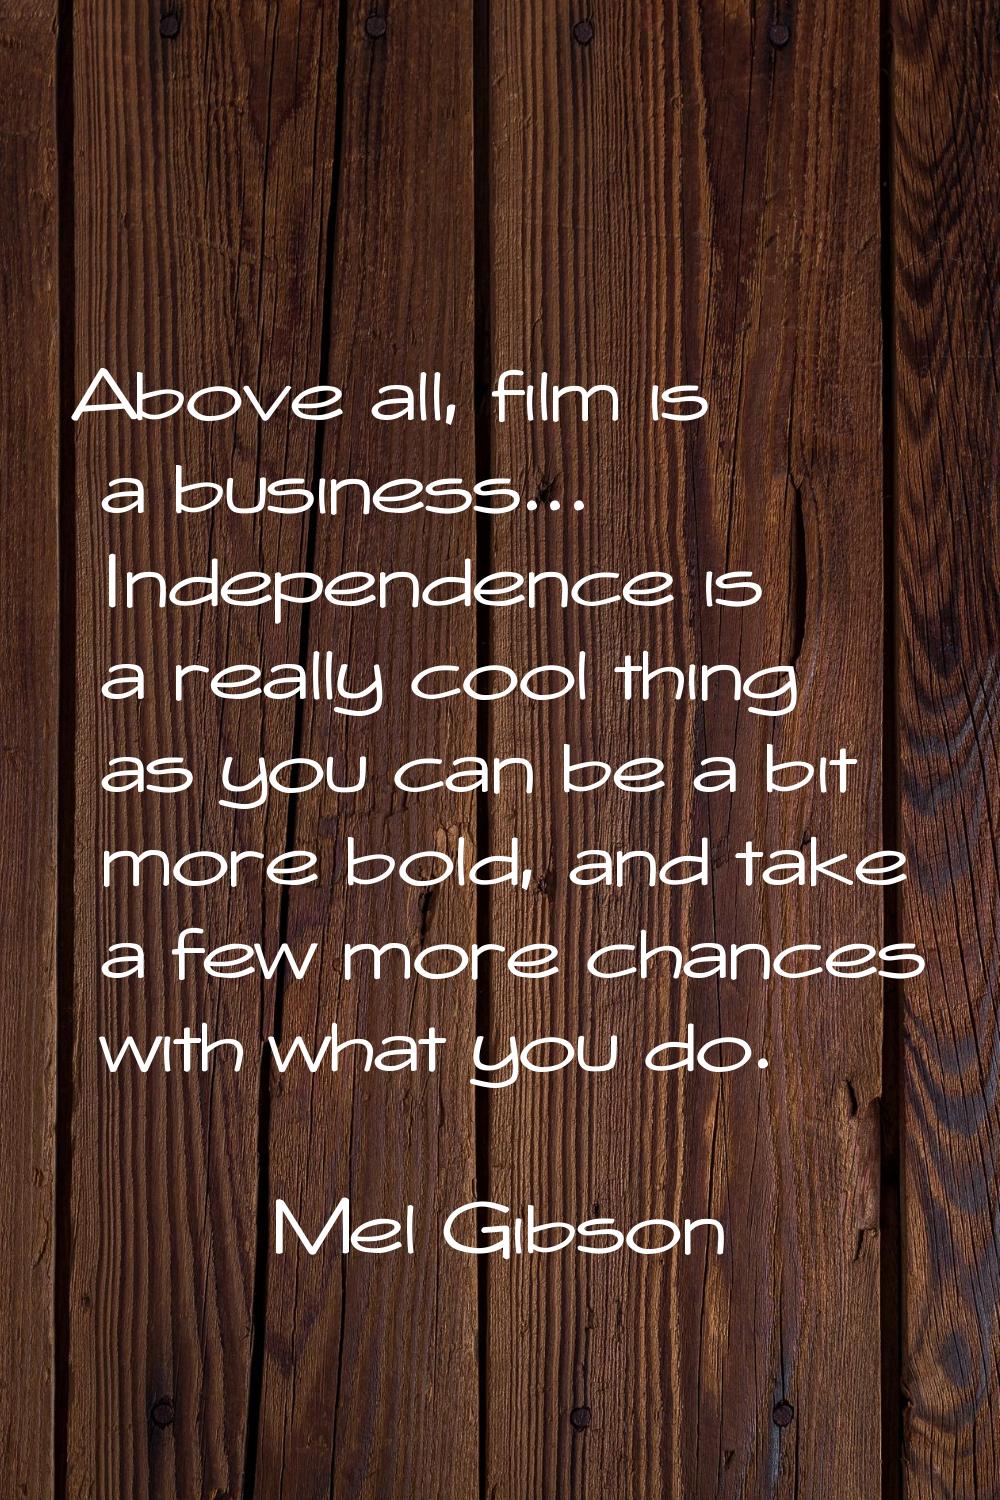 Above all, film is a business... Independence is a really cool thing as you can be a bit more bold,